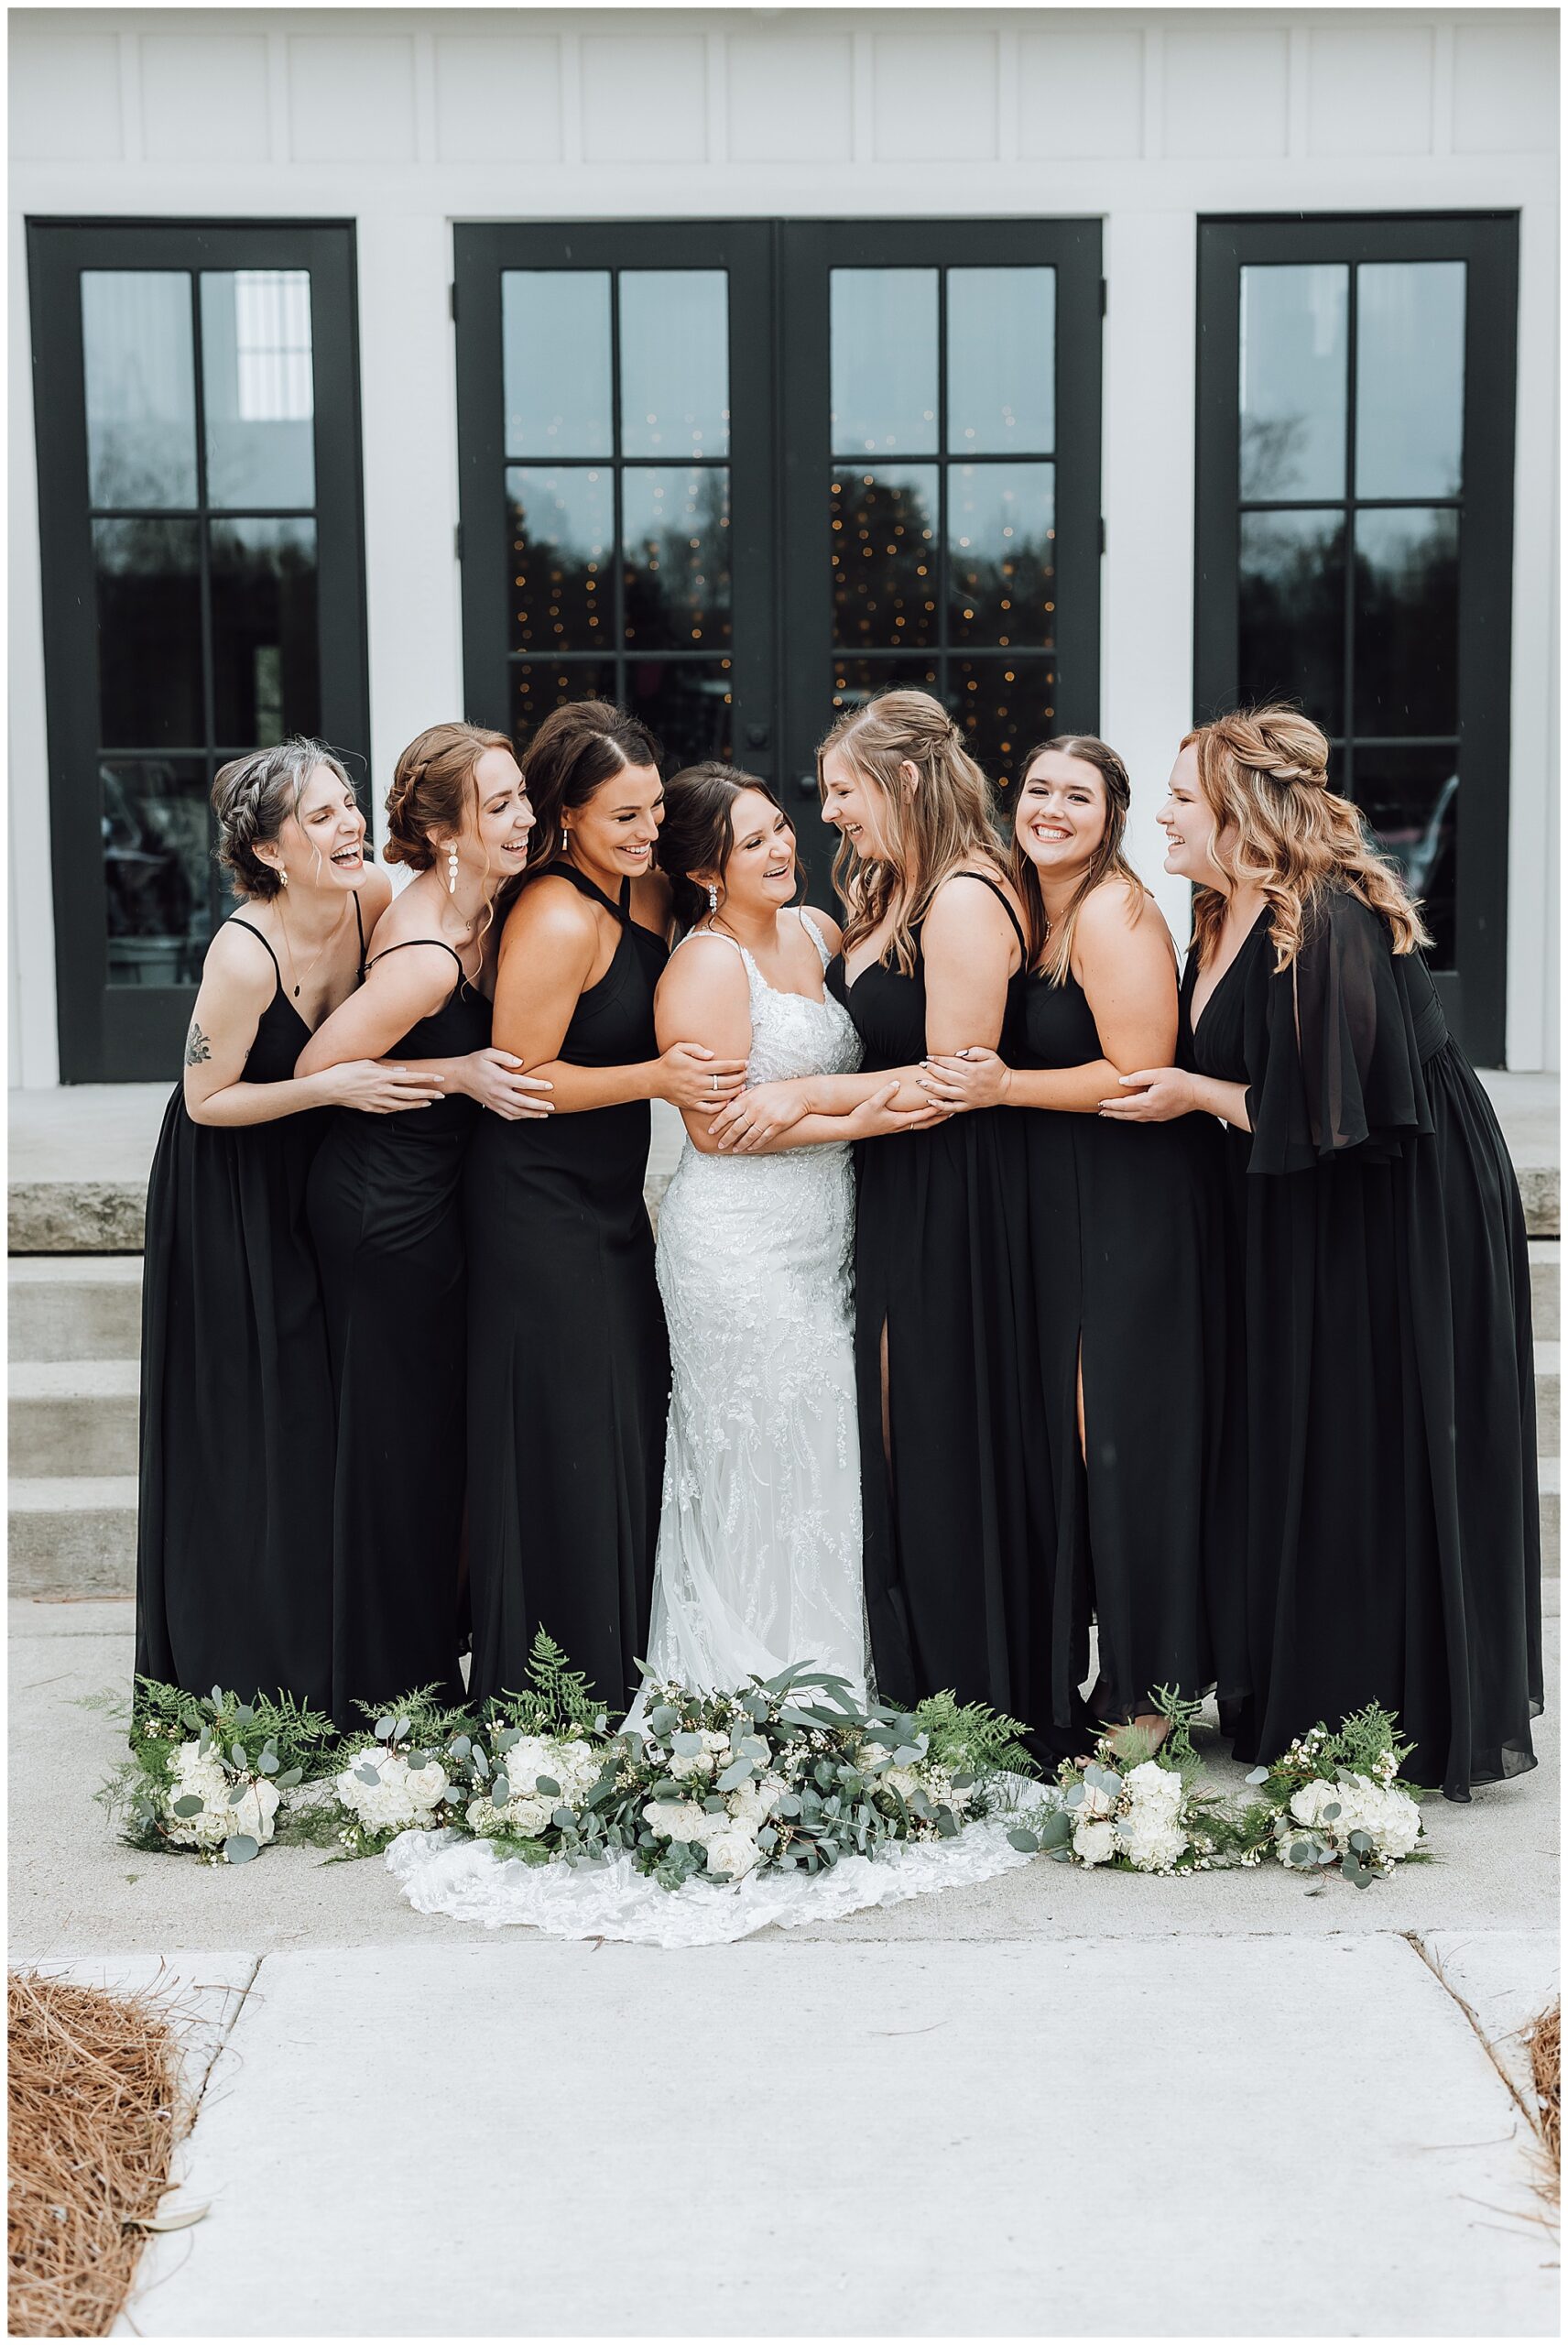 Bridal party all hug on the bride with their bouquets at their feet